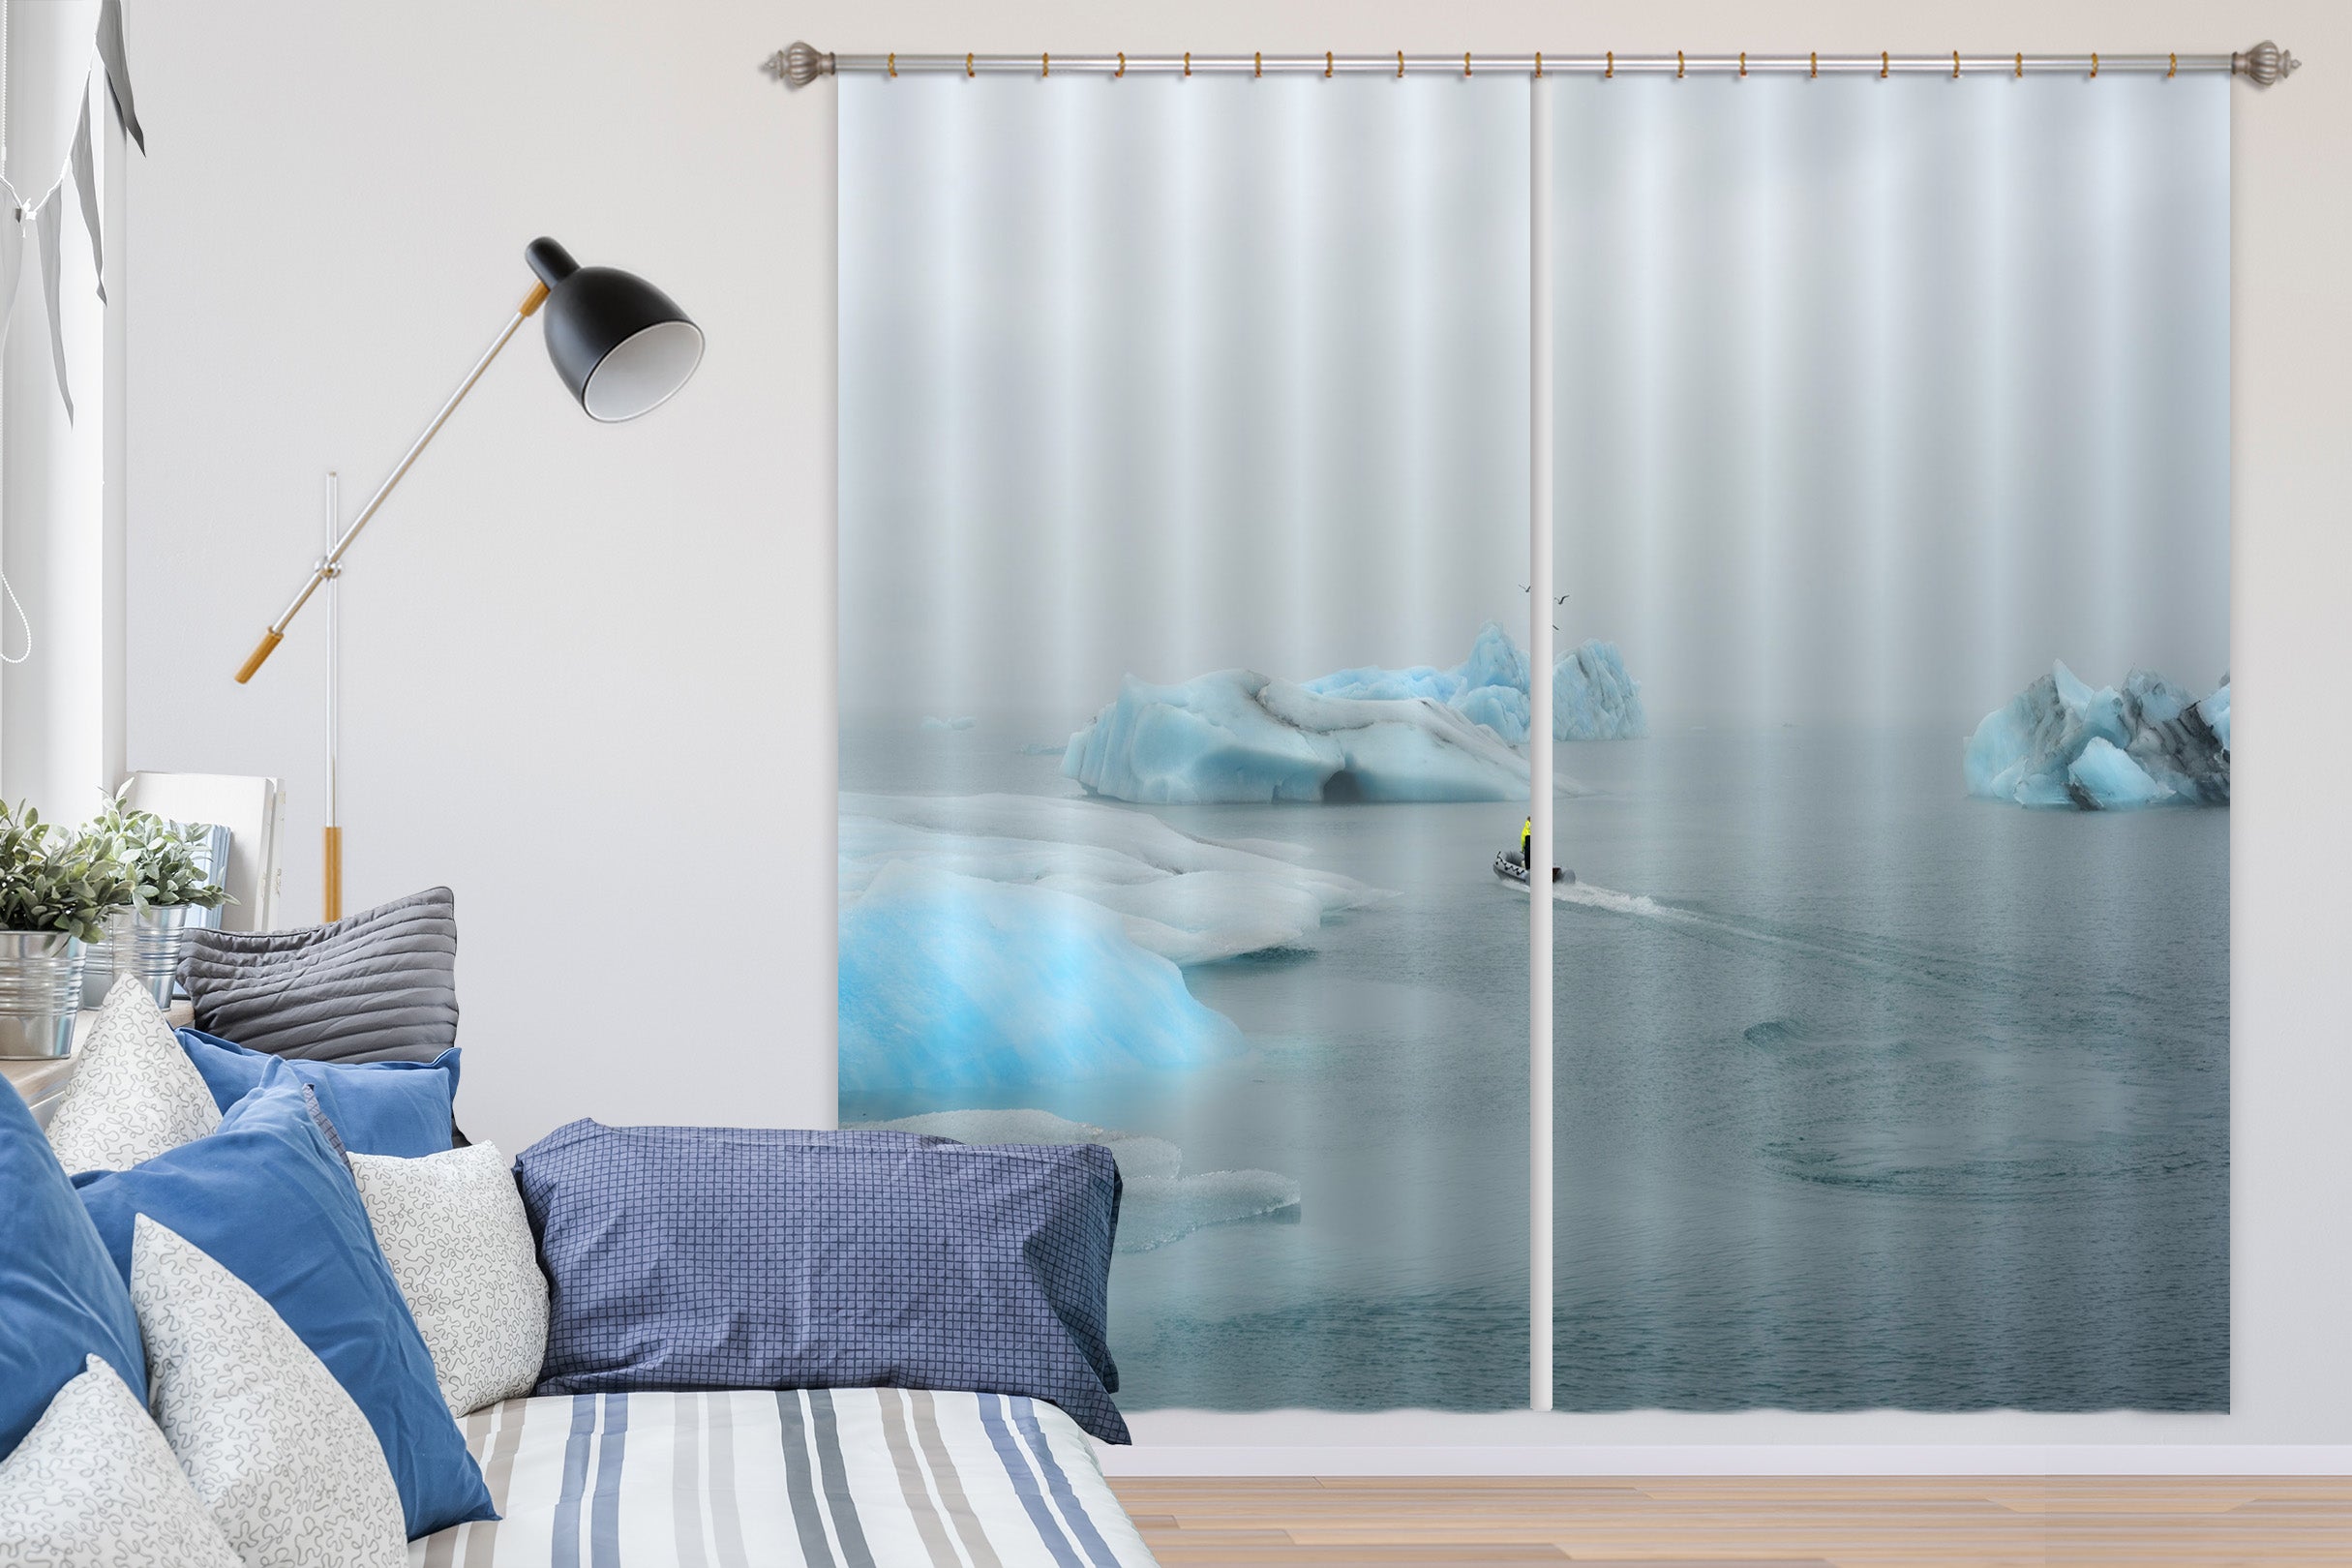 3D Iceland 130 Marco Carmassi Curtain Curtains Drapes